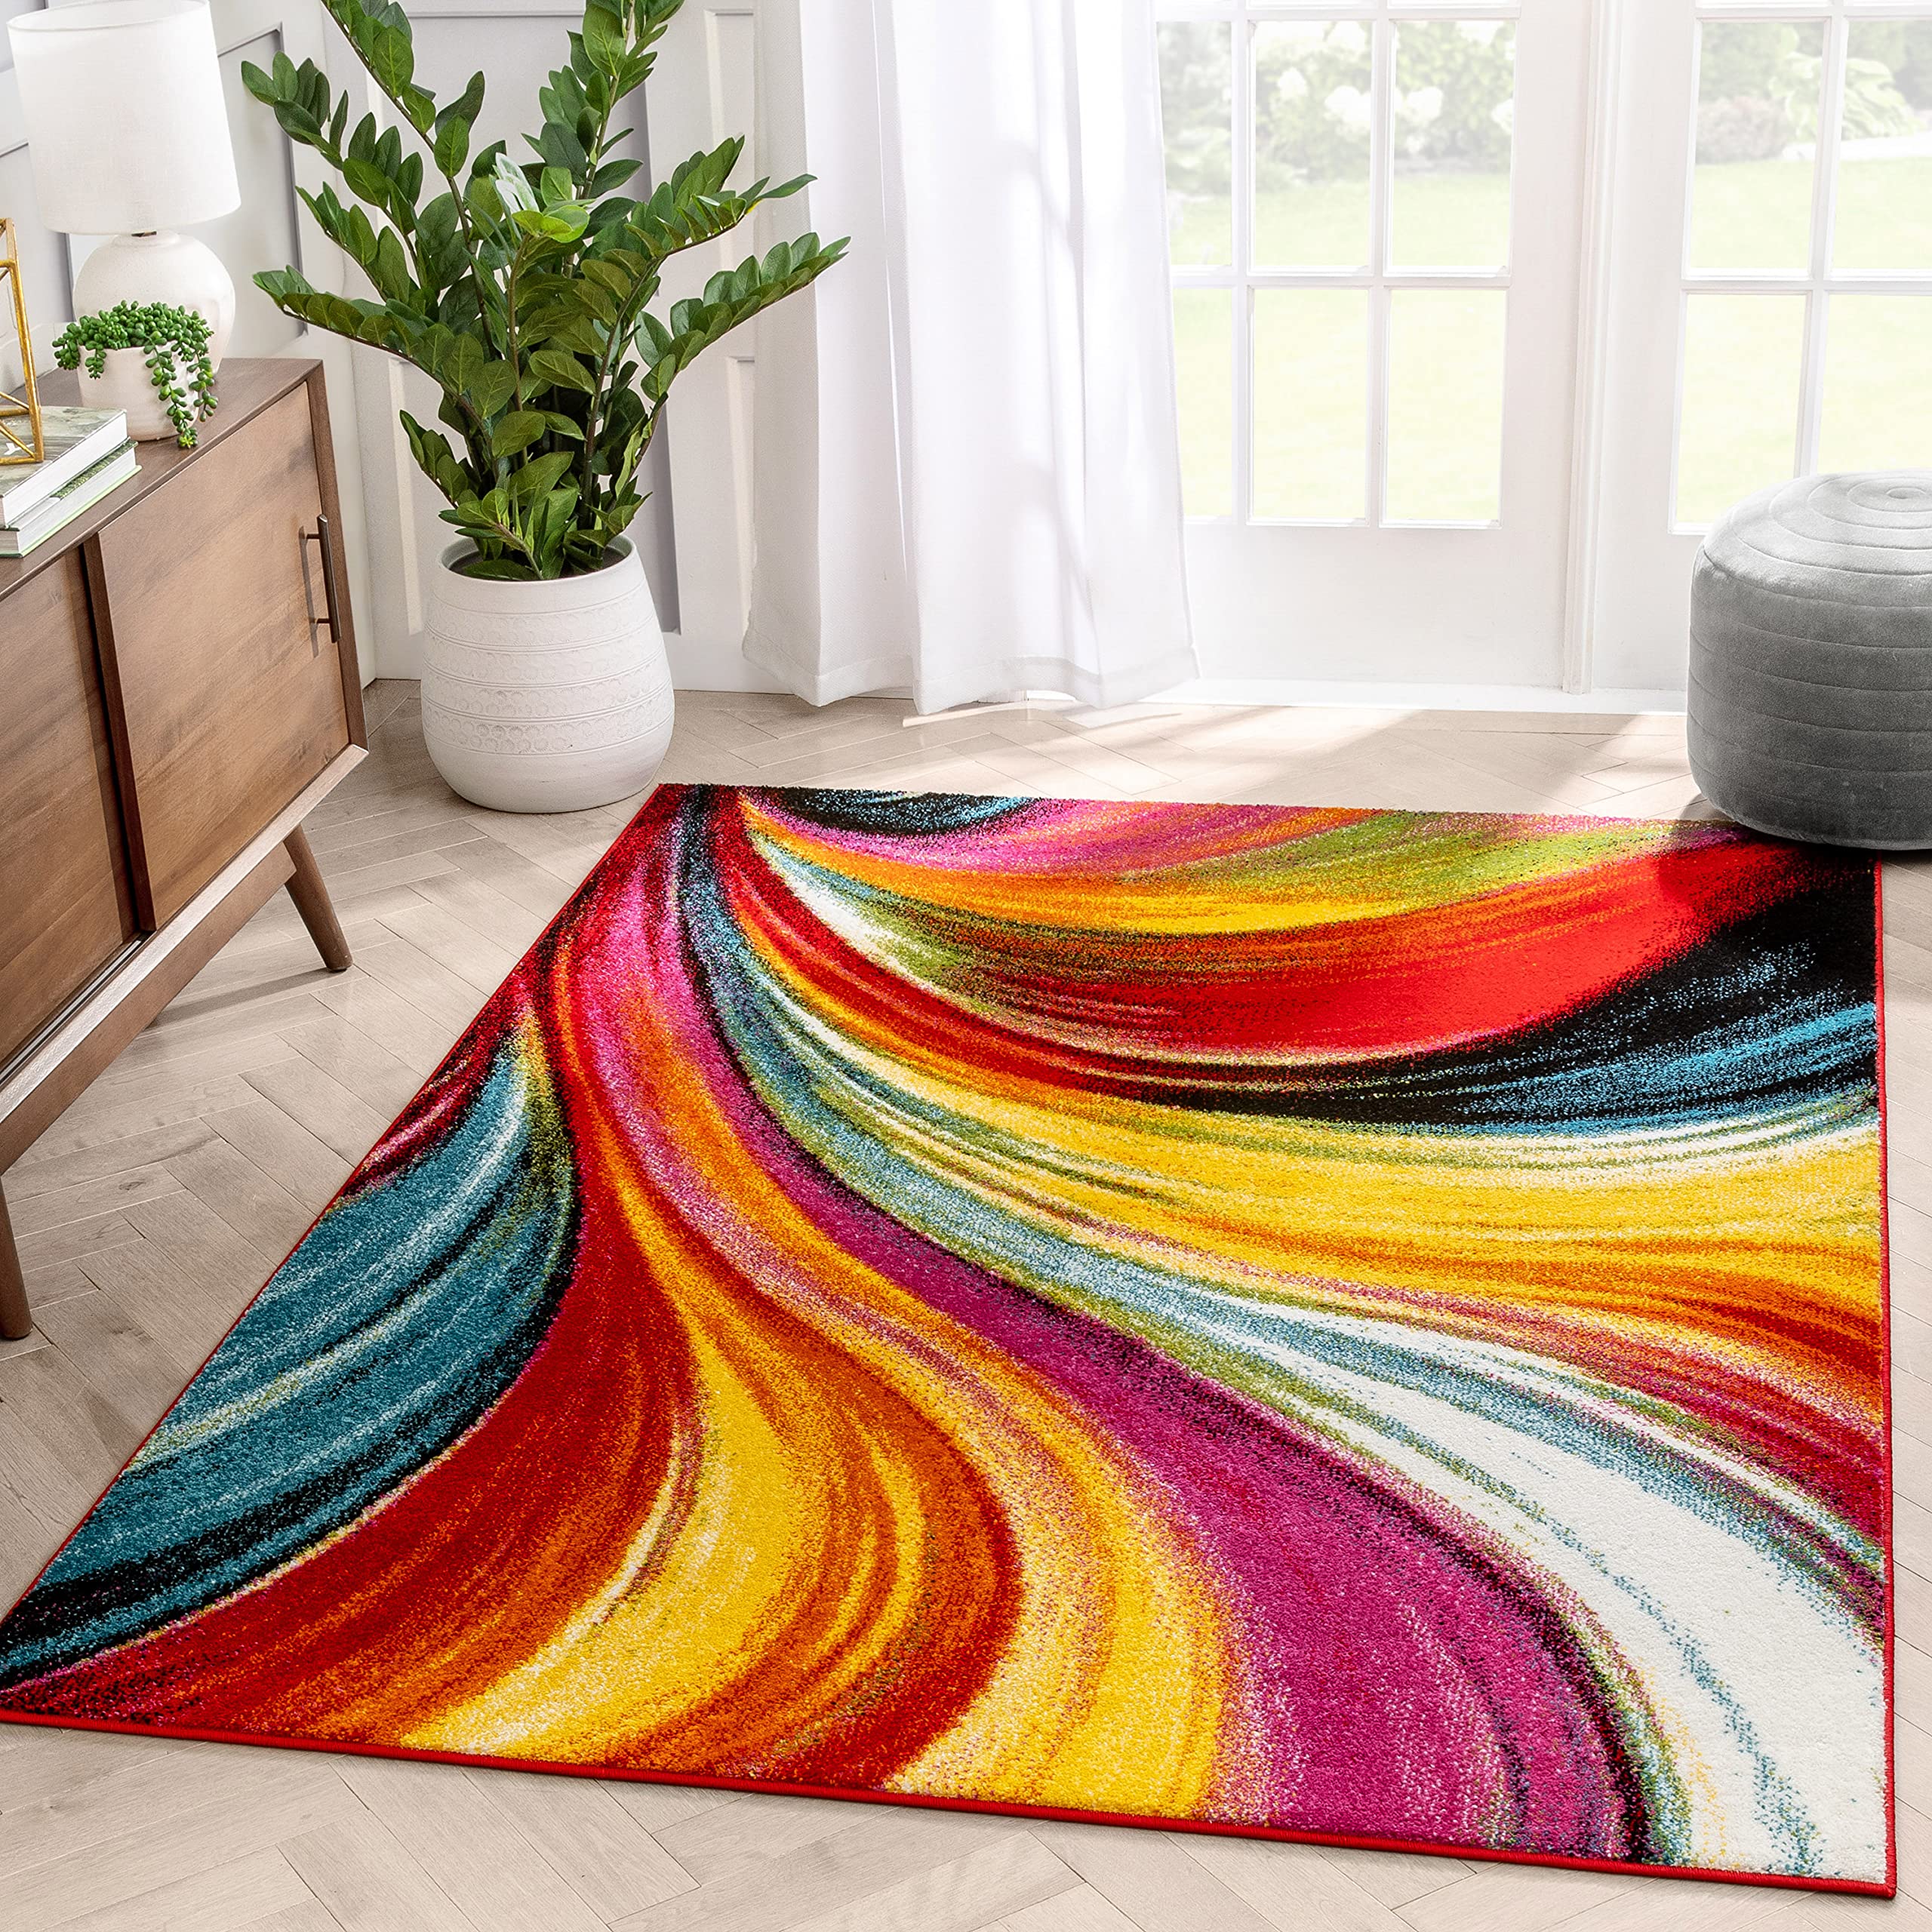 Well Woven Aurora Multi Red Yellow Orange Swirl Lines Modern Geometric Abstract Brush Stroke Area Rug(5'3inx7'3in)Easy Clean Stain Resistan...